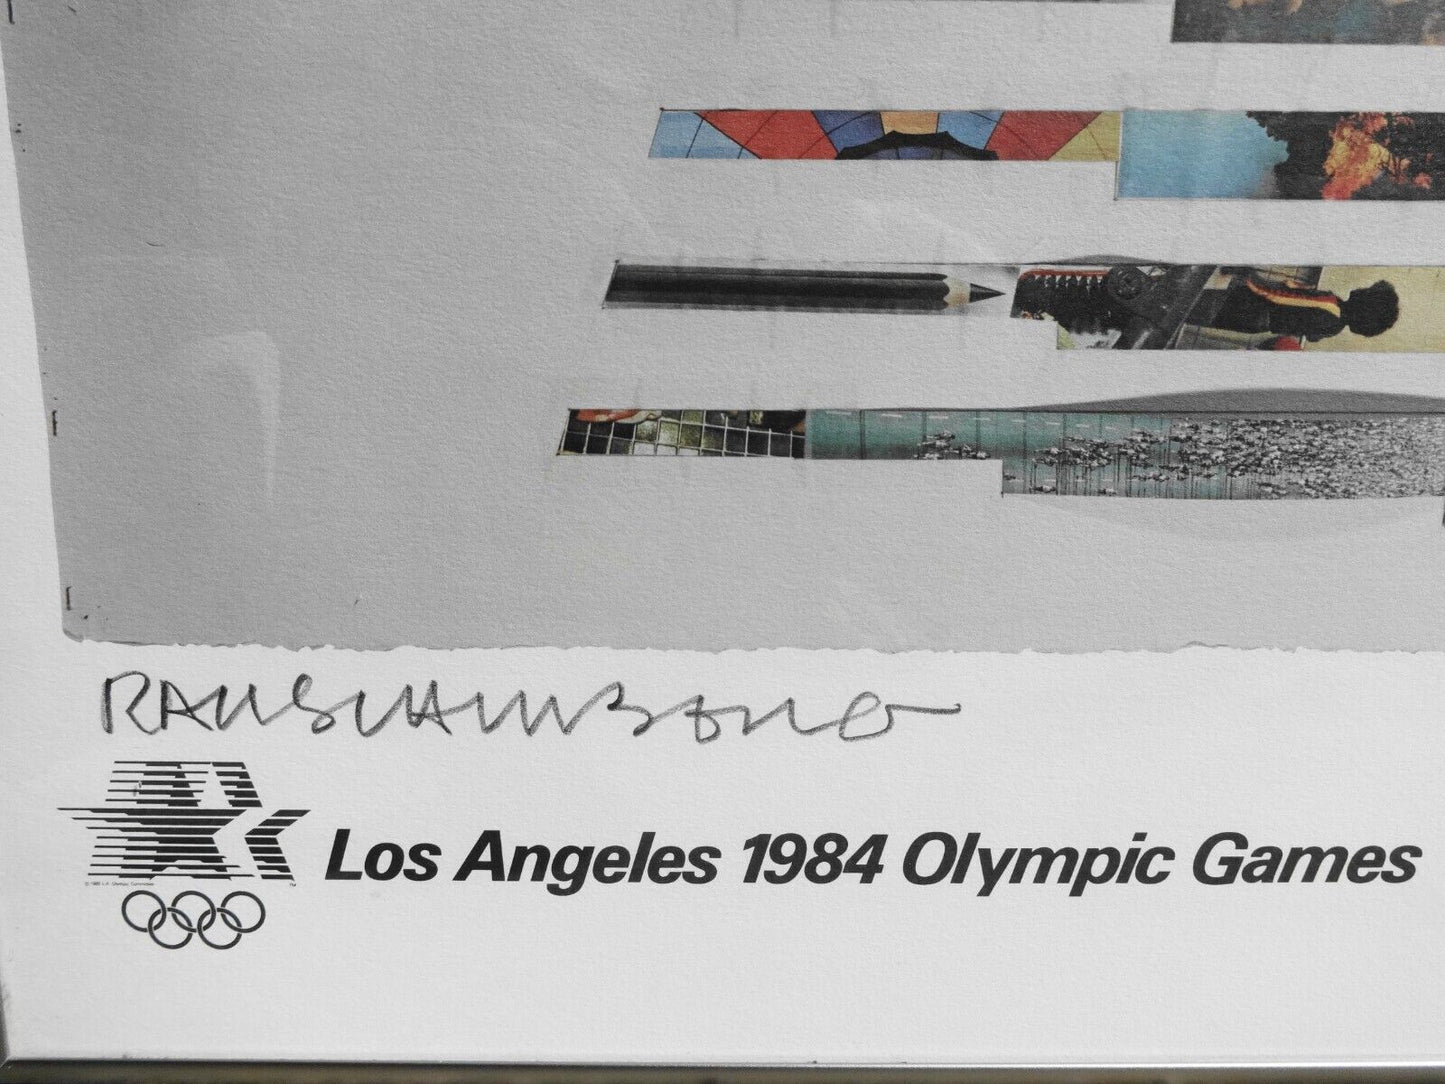 Singed Robert R Rauschenberg Stars In Motion 1984 Los Angeles Olympic Games